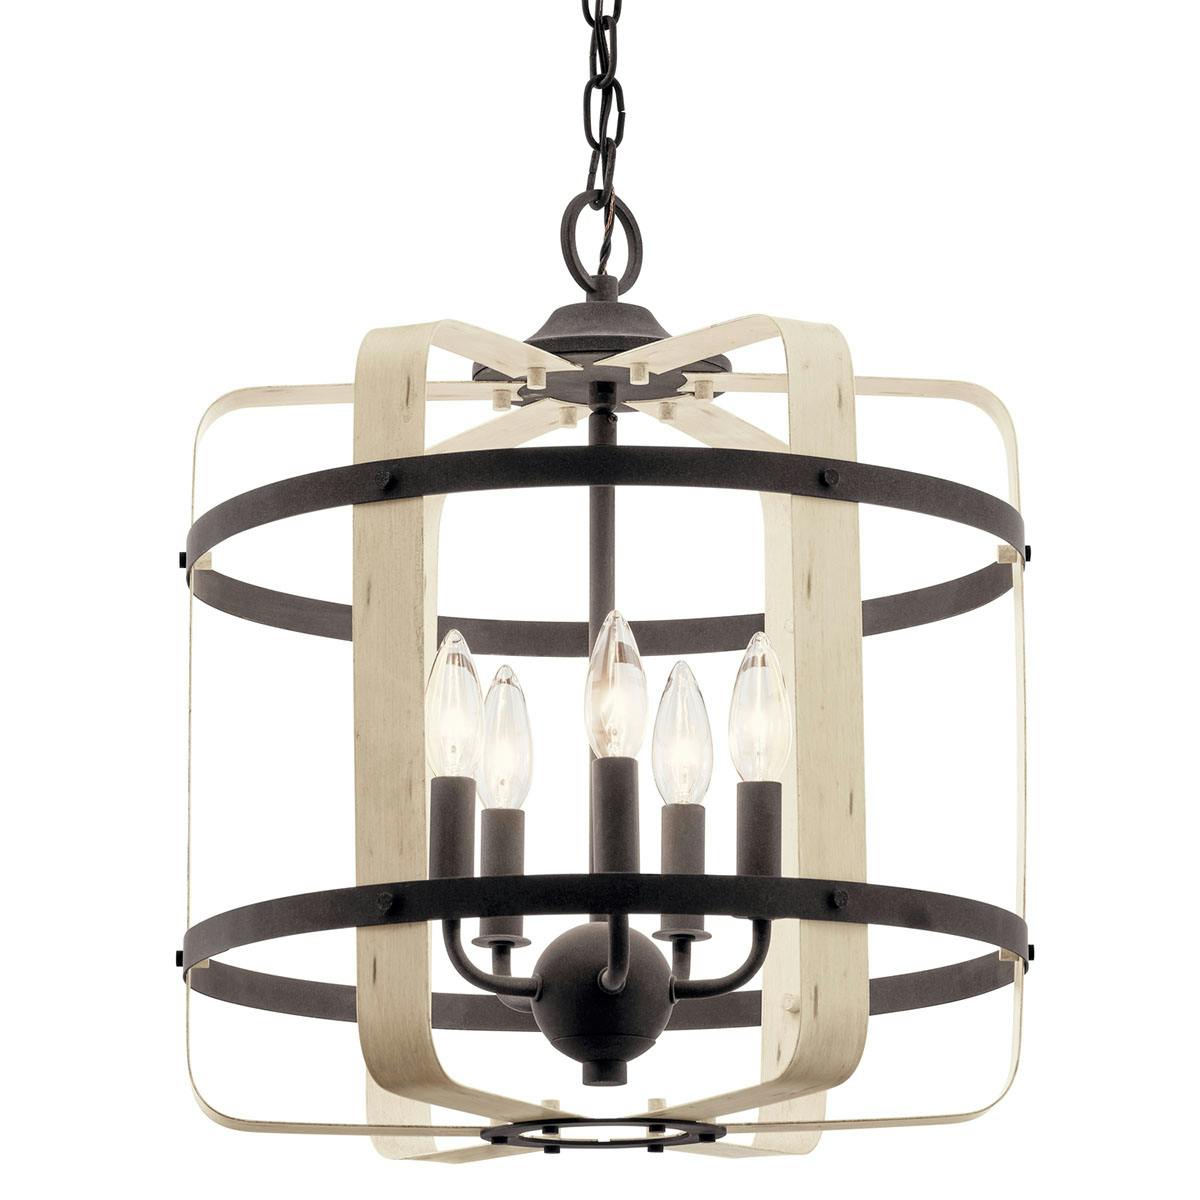 Gartin 18" Pendant Zinc and White-Washed without the canopy on a white background